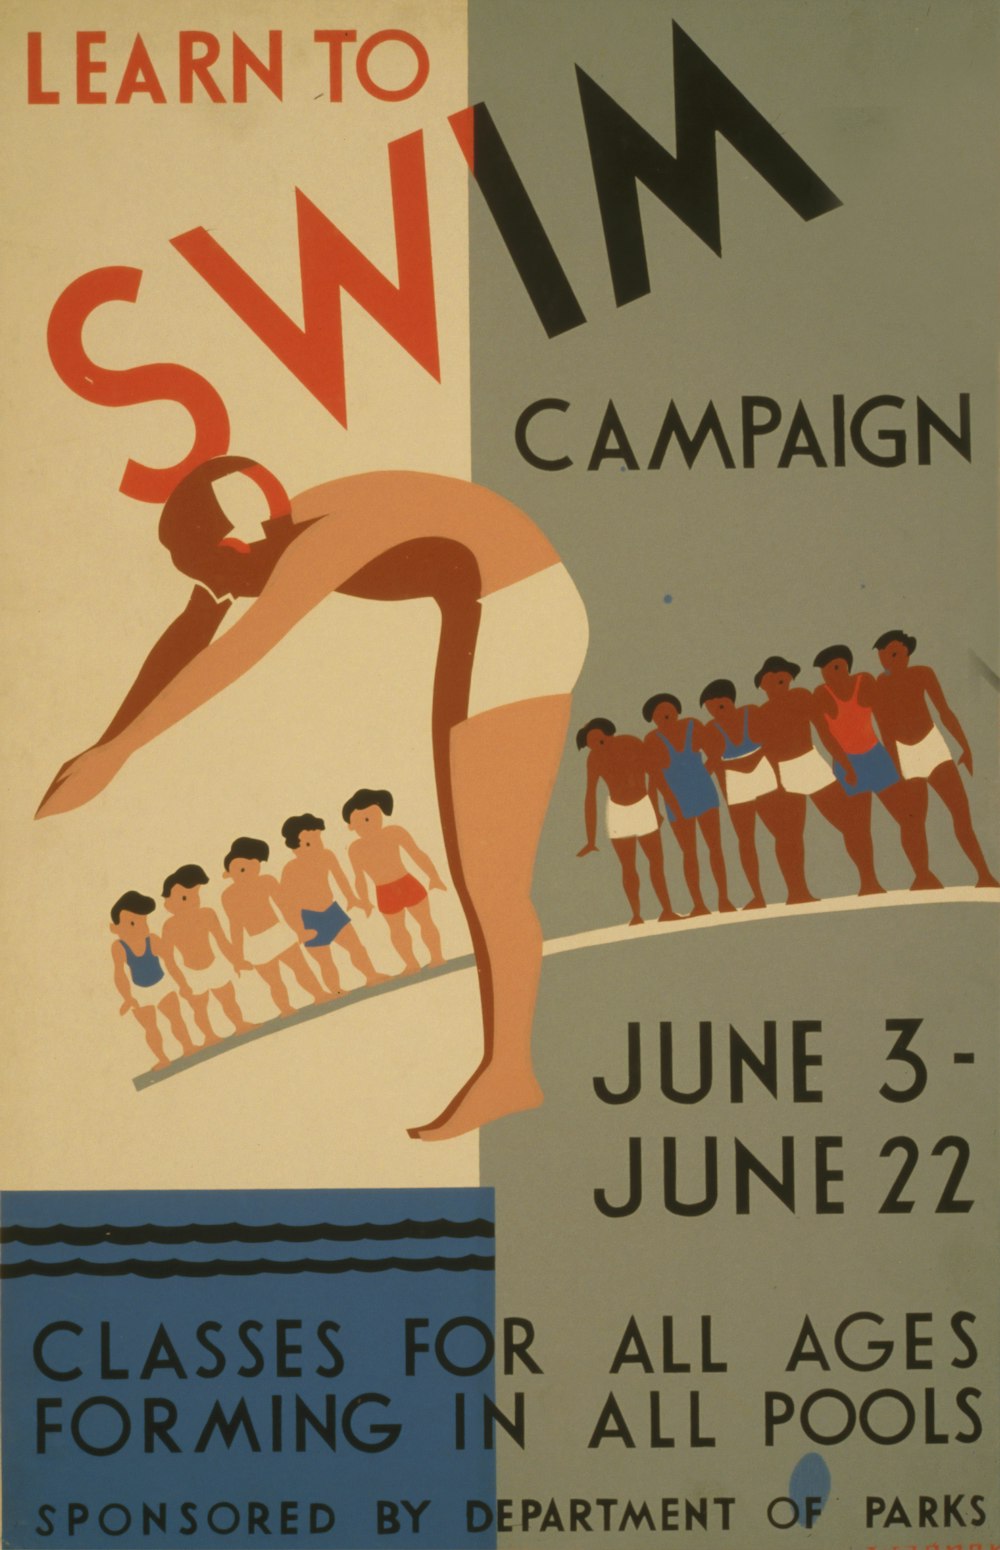 Learn to swim campaign. WPA poster.